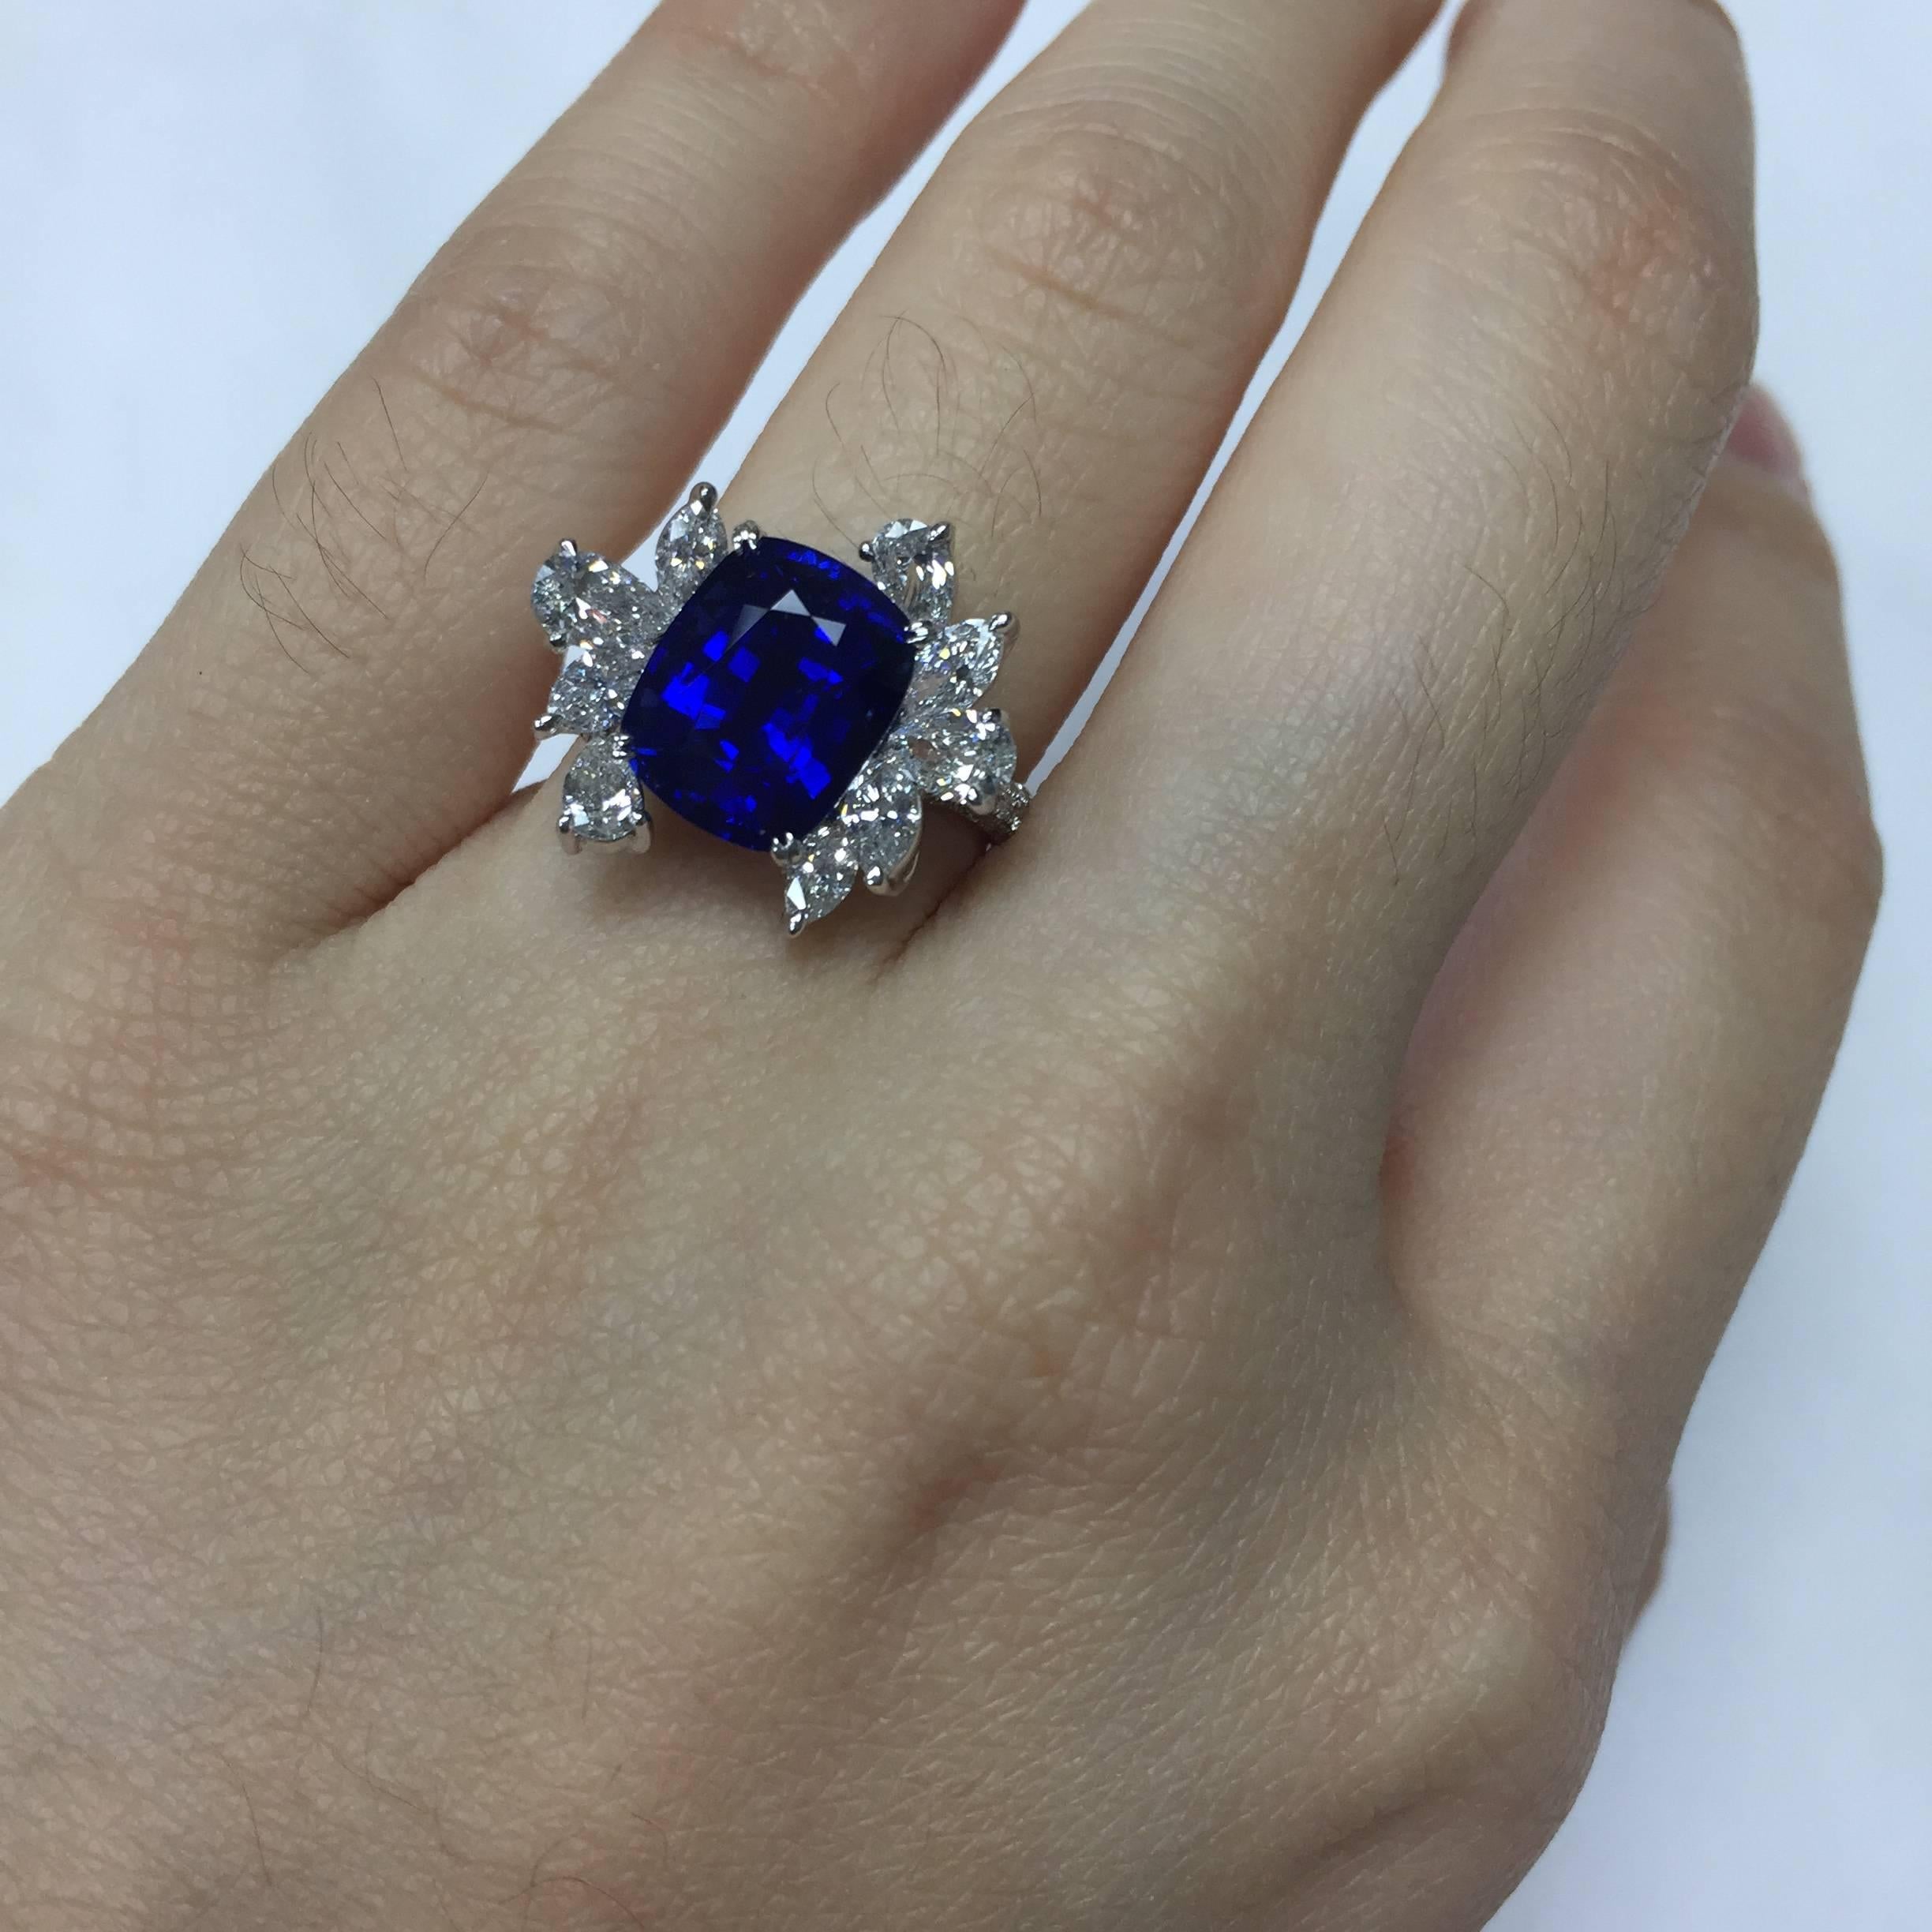 Ring in 18kt white gold set with one cushion cut blue Ceylon Sapphire (5.08 carat), 4 pear-shaped diamonds (0.63 carats), 5 marquise-shaped diamonds (0.62 carats), and 135 brilliant-cut diamonds (0.54 carats)

Total Carat Weight: 6.87ct
Total